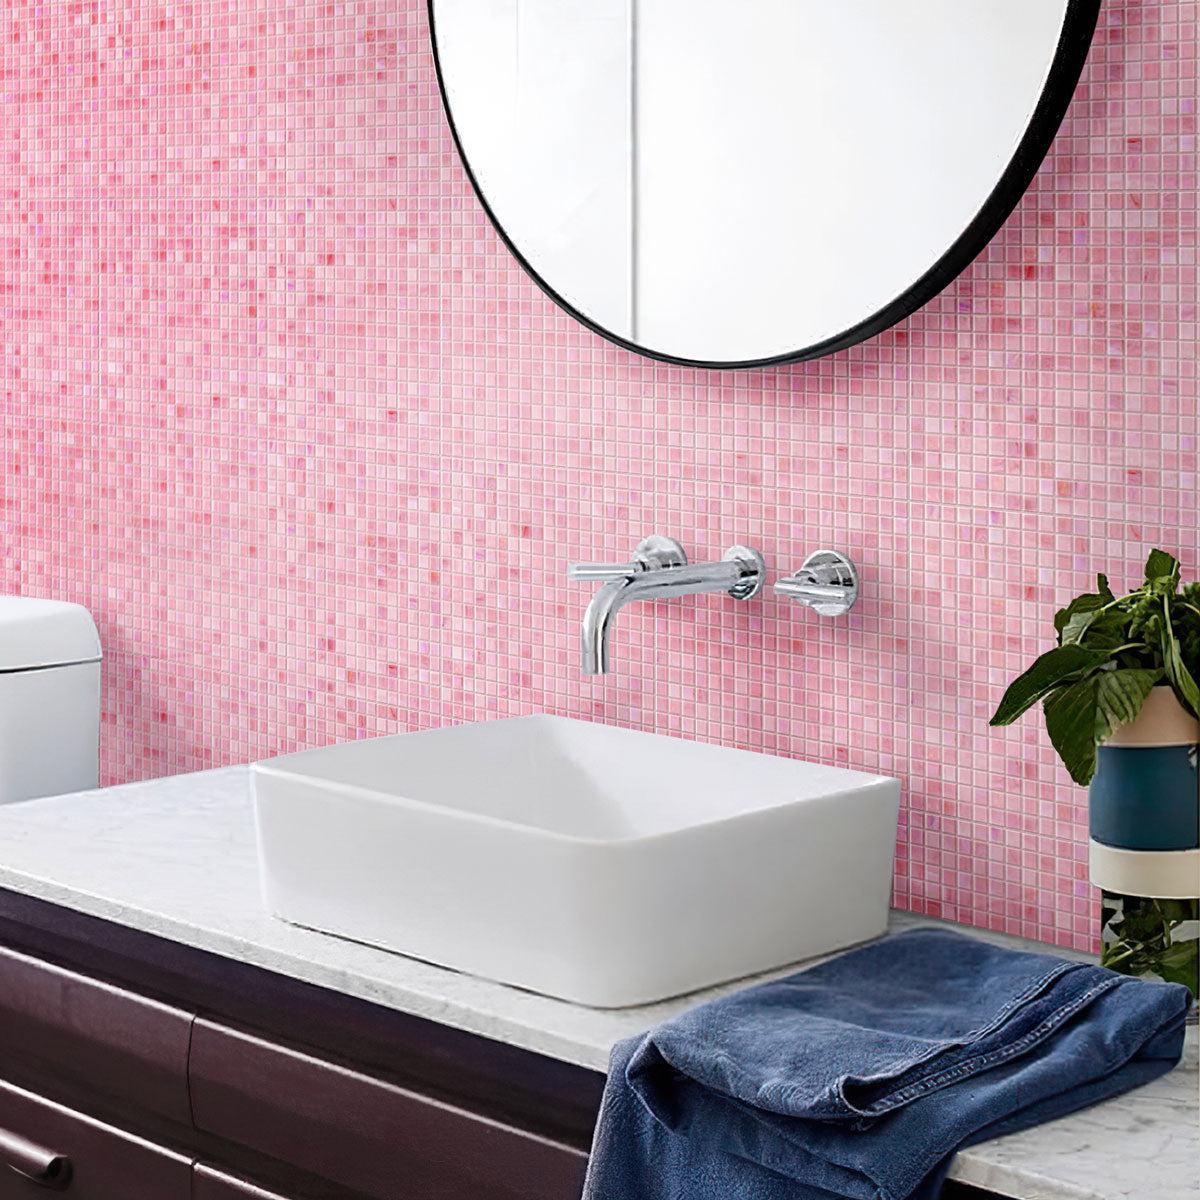 Swirled Rose Squares Glass Tile adds a romantic touch to the bathroom